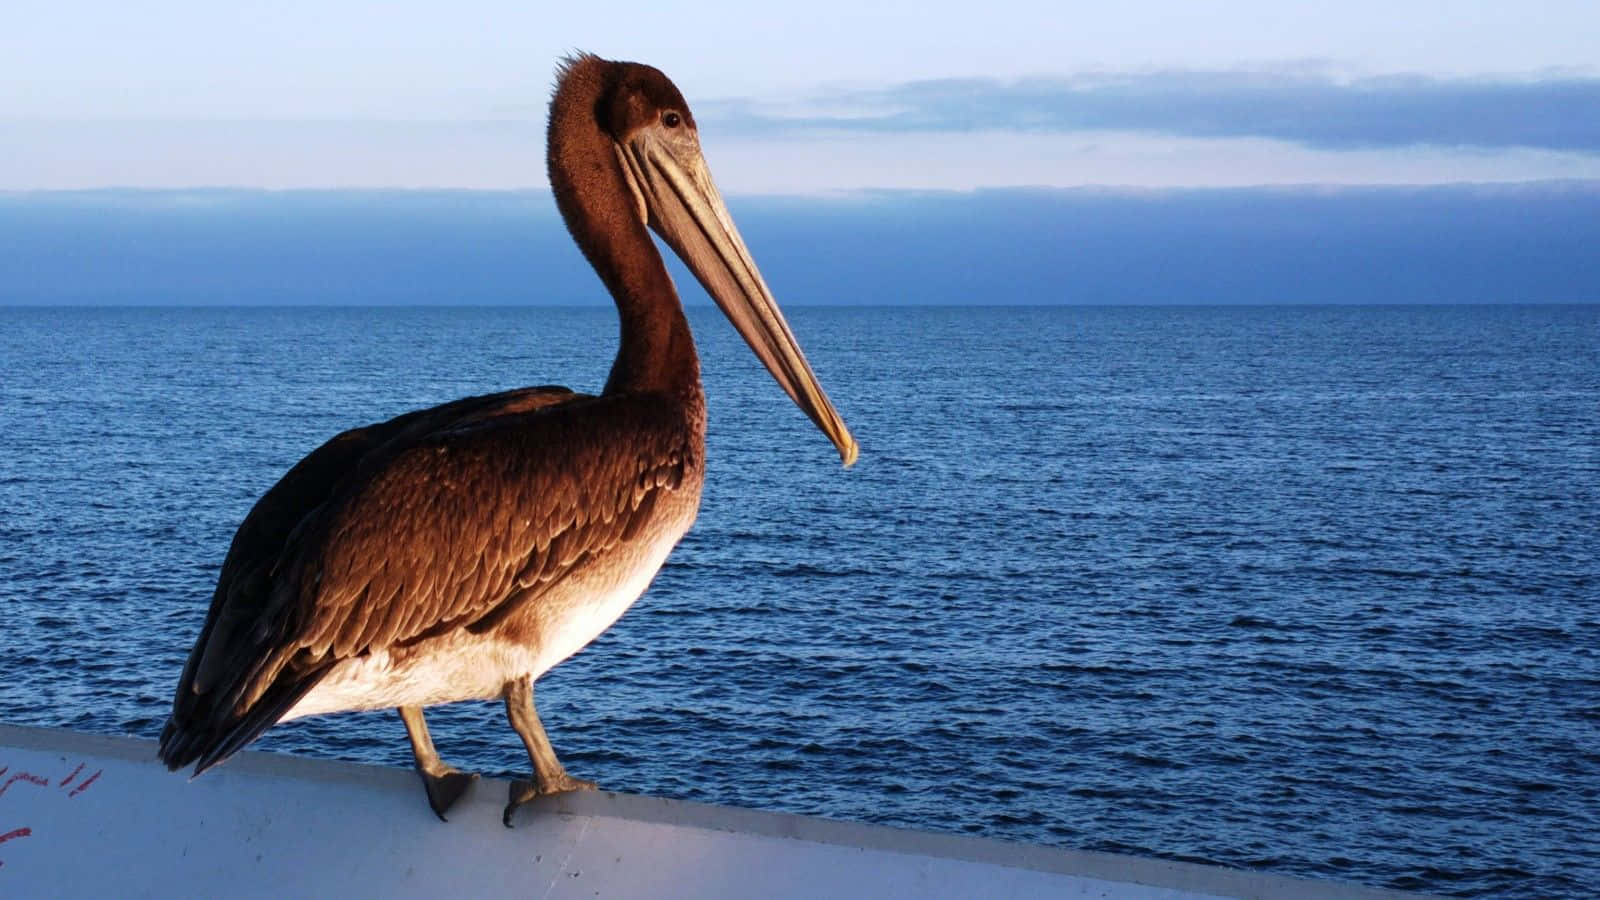 A Pelican Is Standing On A Railing